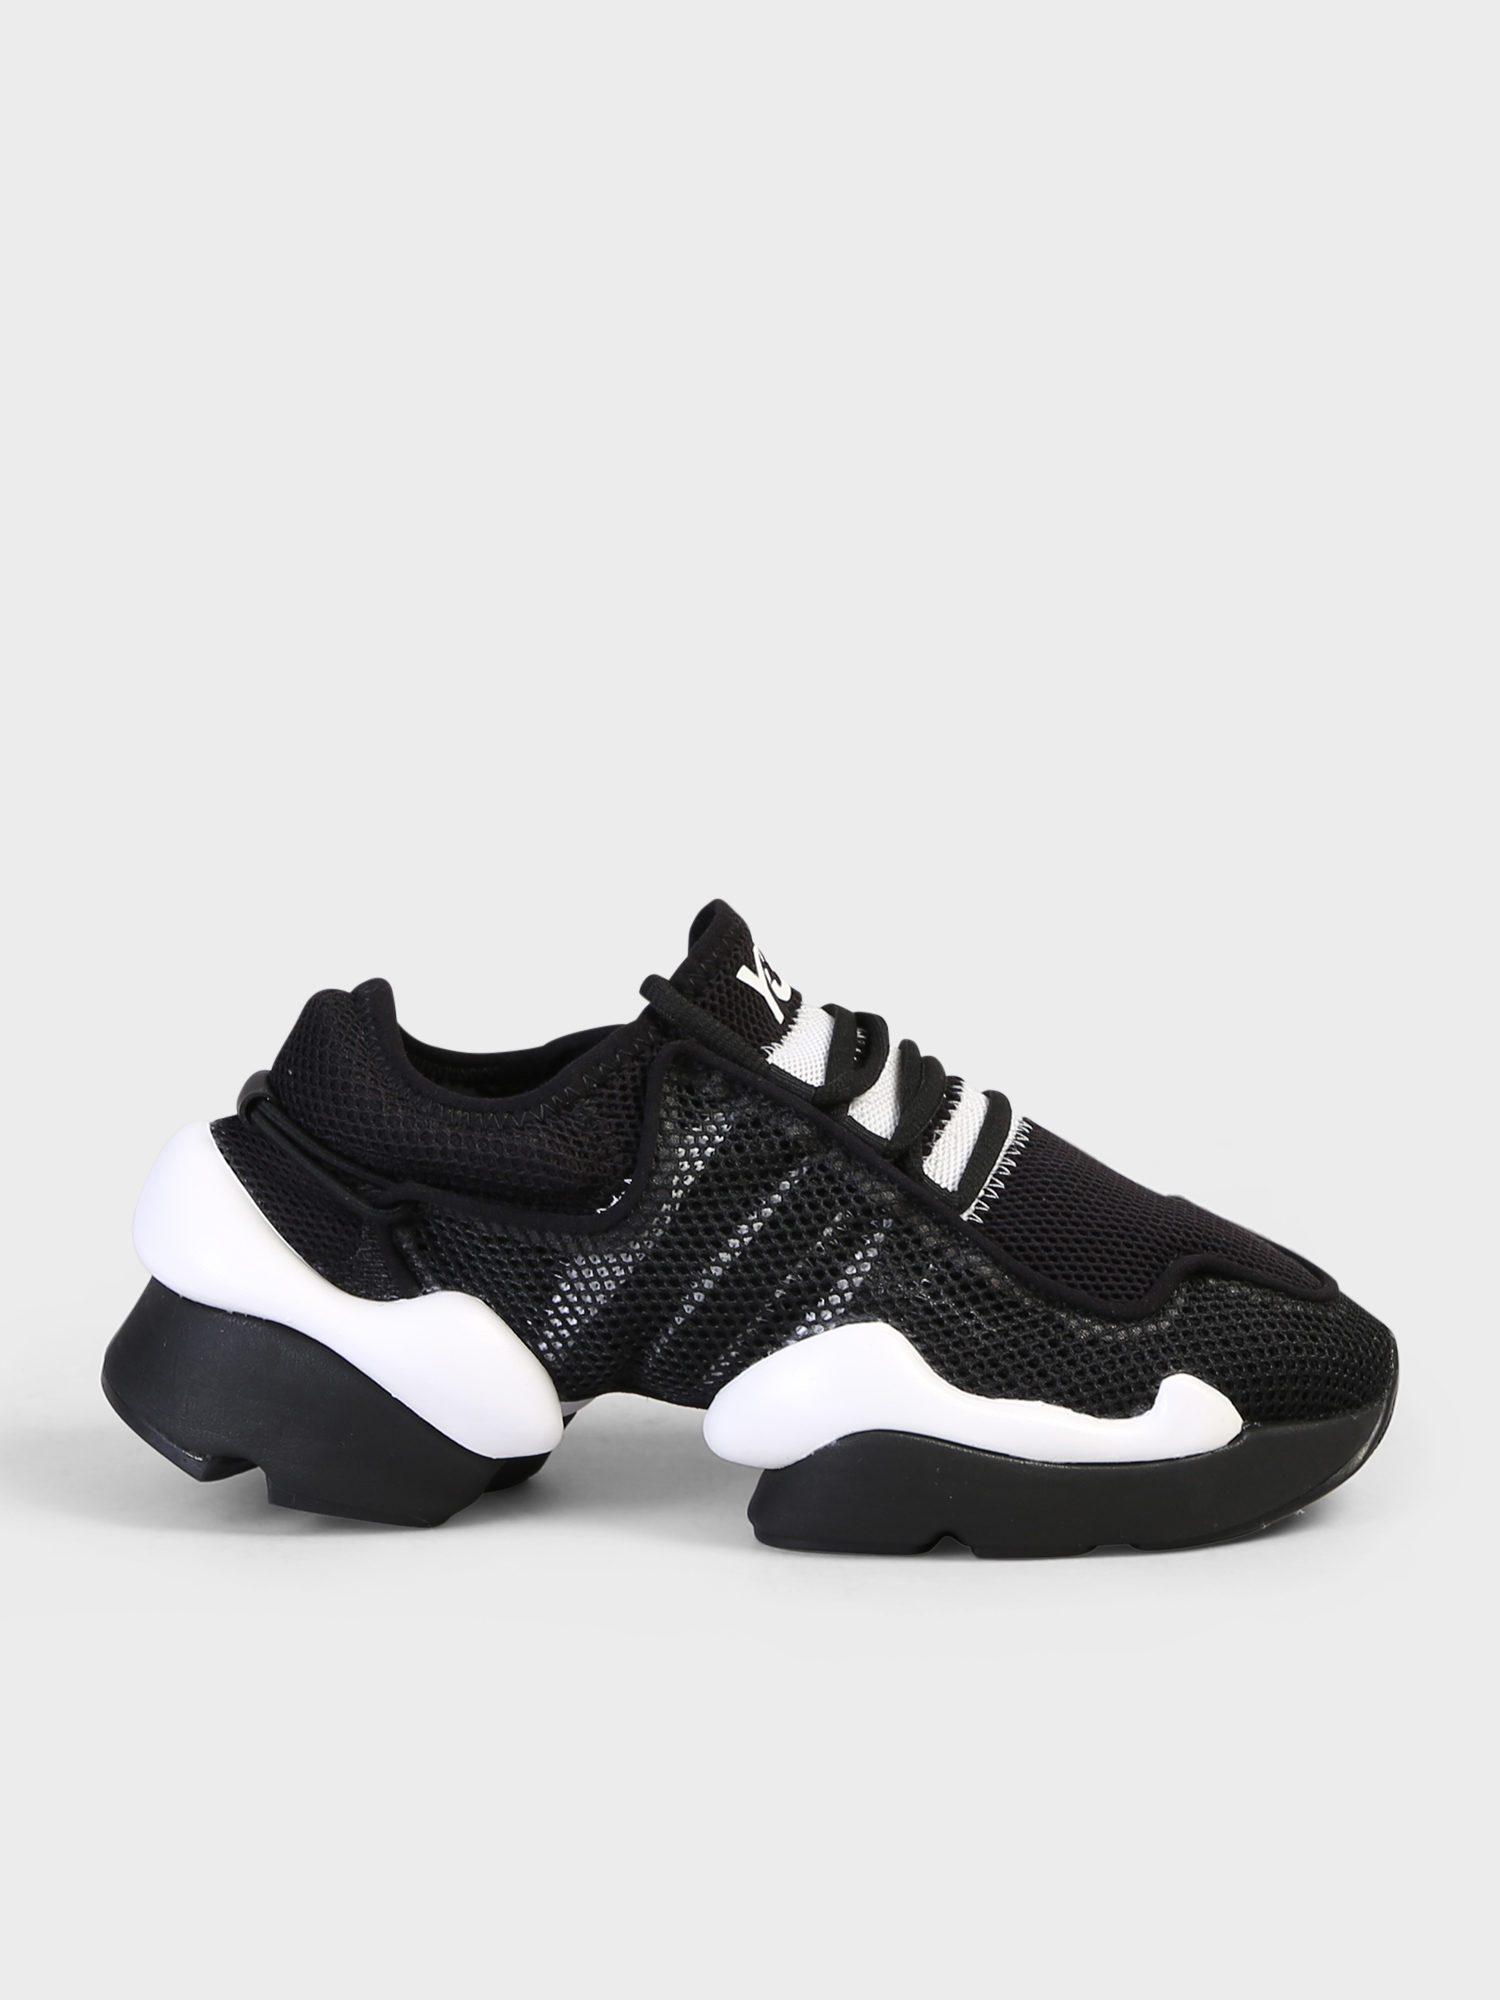 Y-3 Leather Kaiwa Pod Sneakers in Black for Men - Lyst